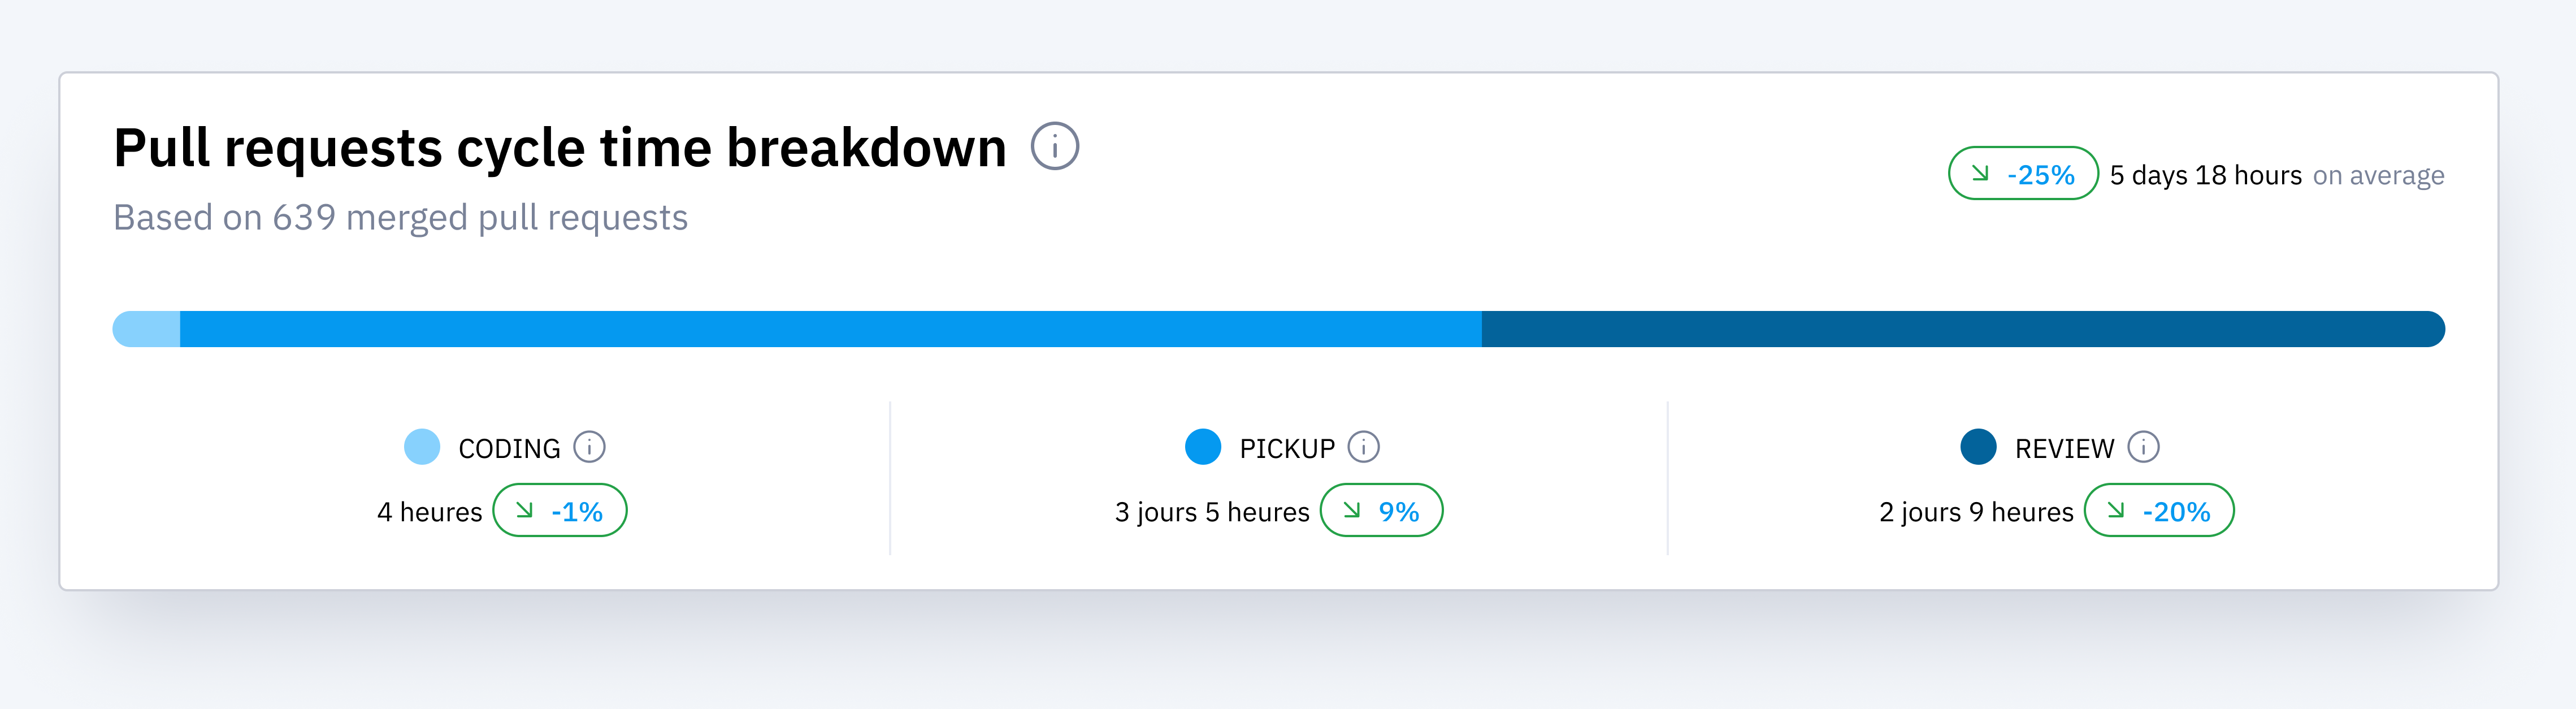 pull requests cycle time breakdown in axify